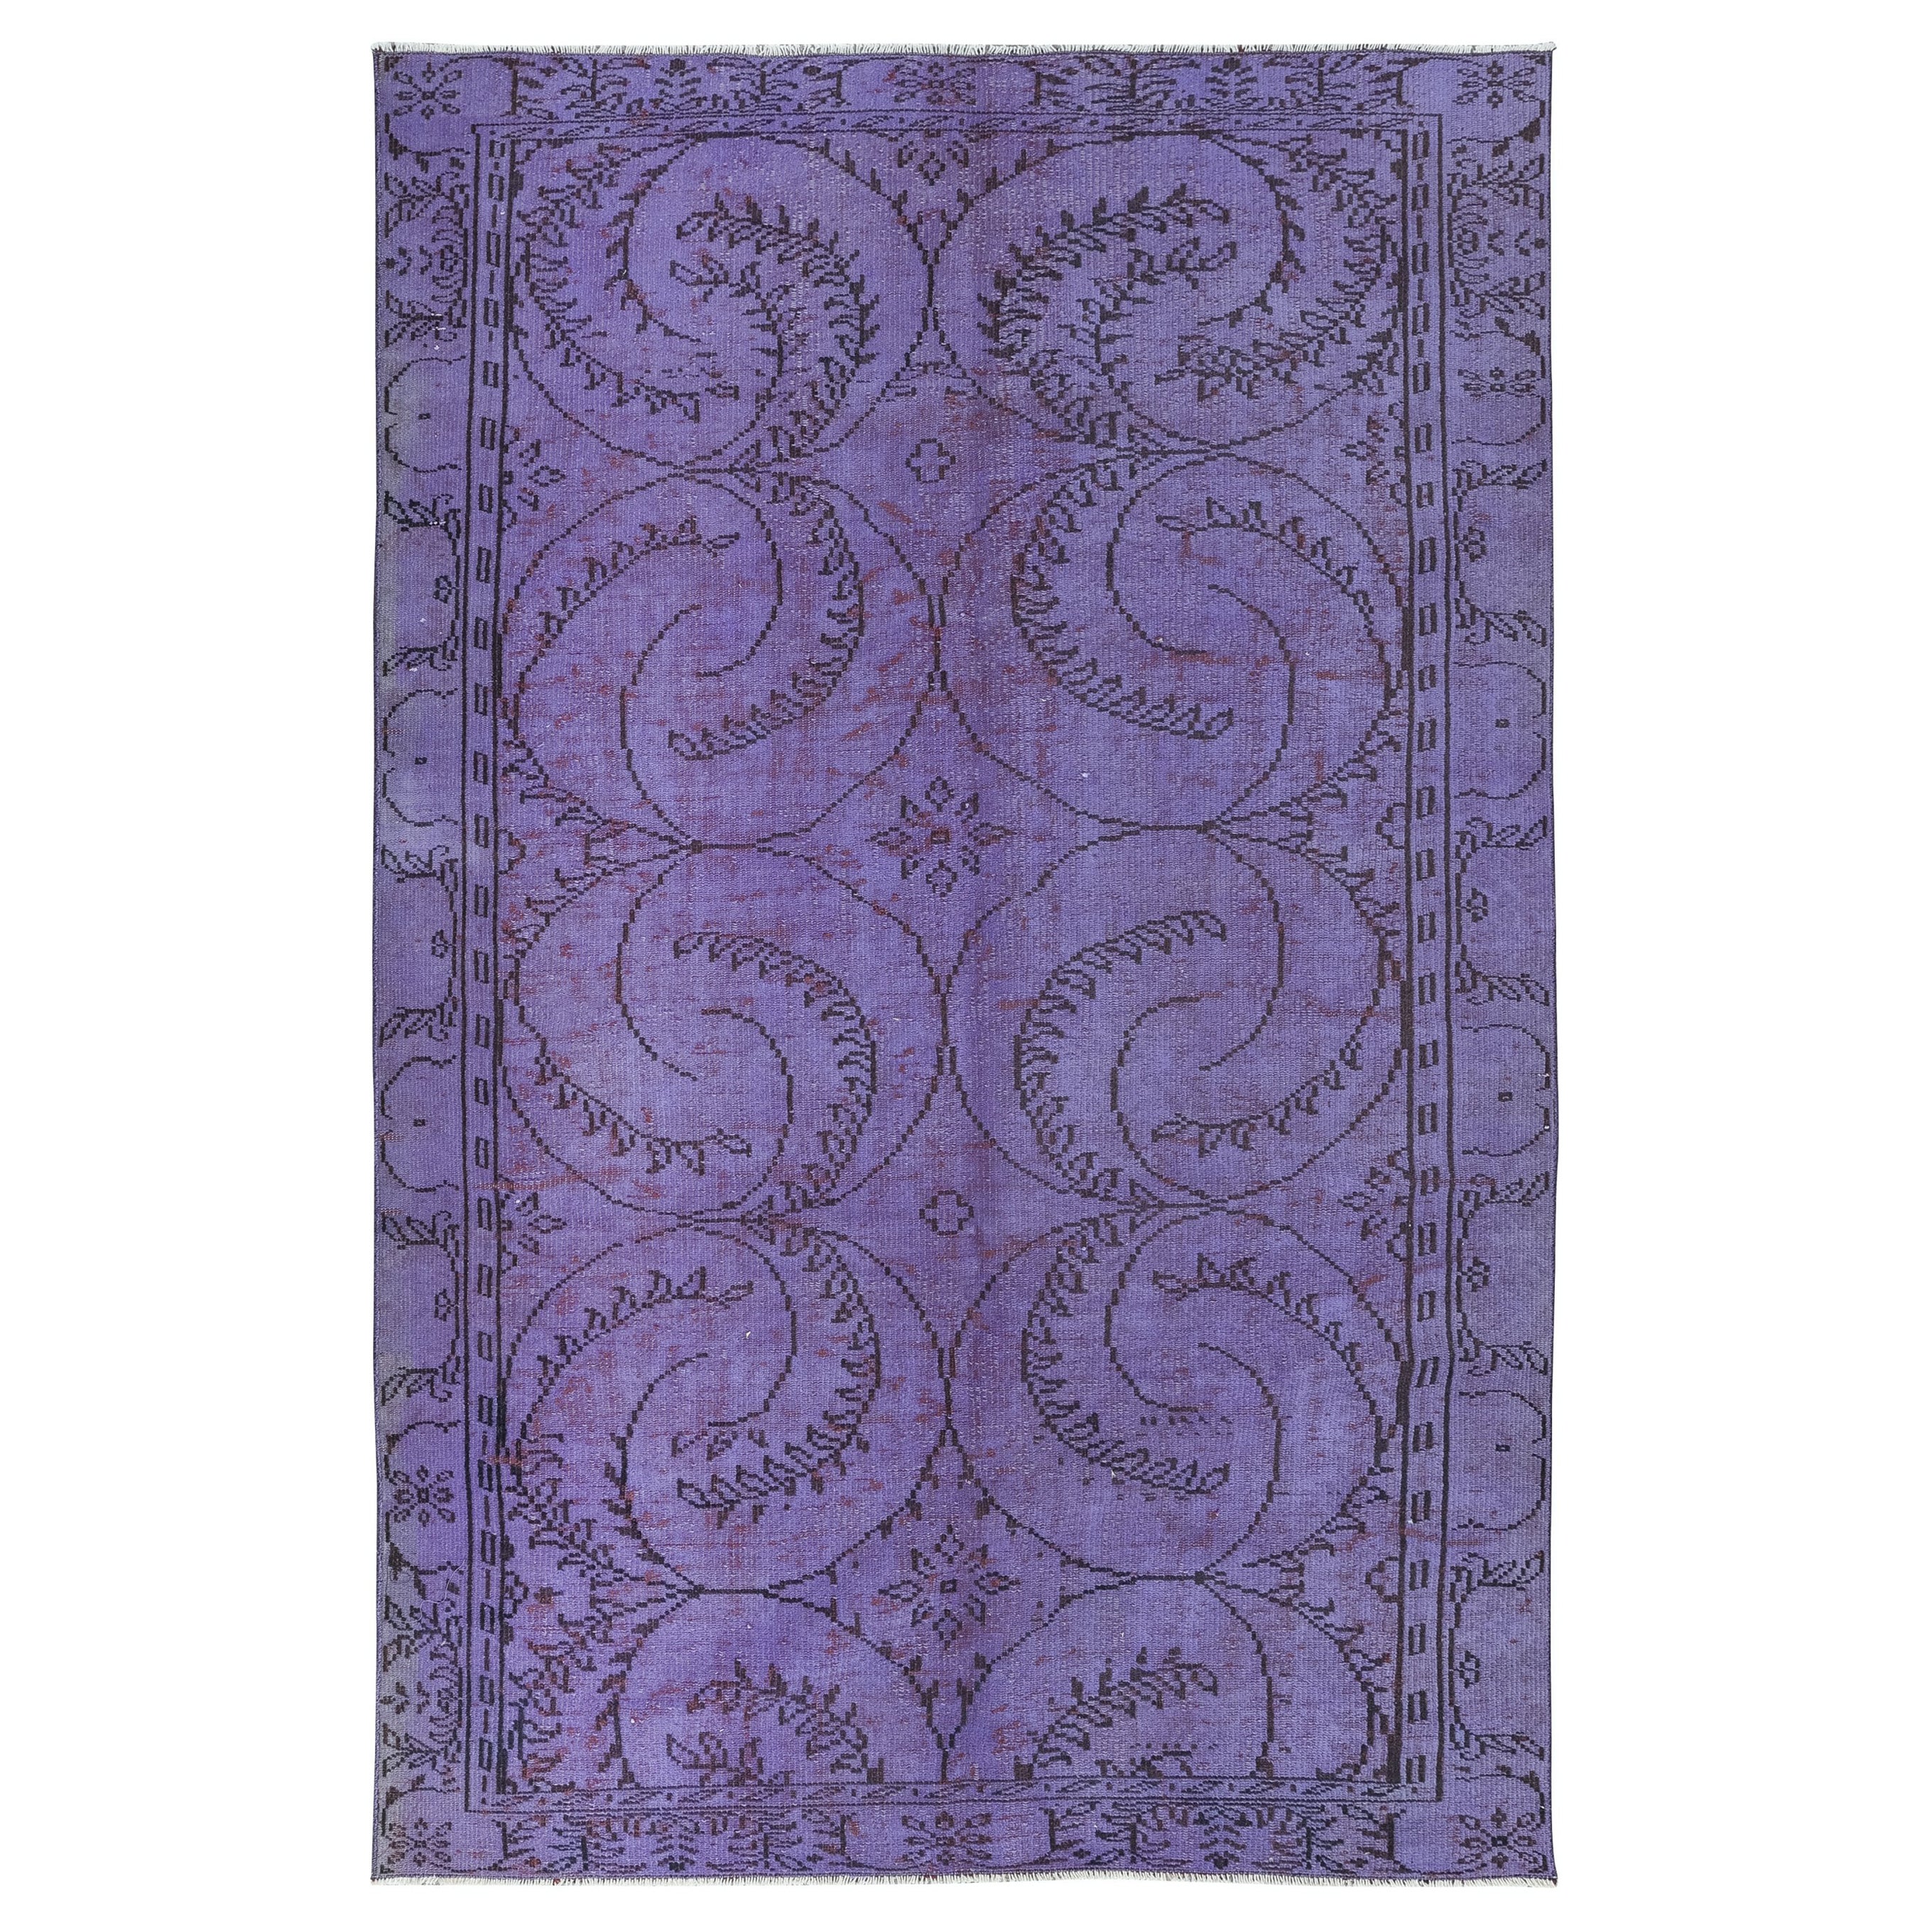 6x9 Ft Contemporary Wool Area Rug in Royal Purple, Hand-Knotted in Turkey